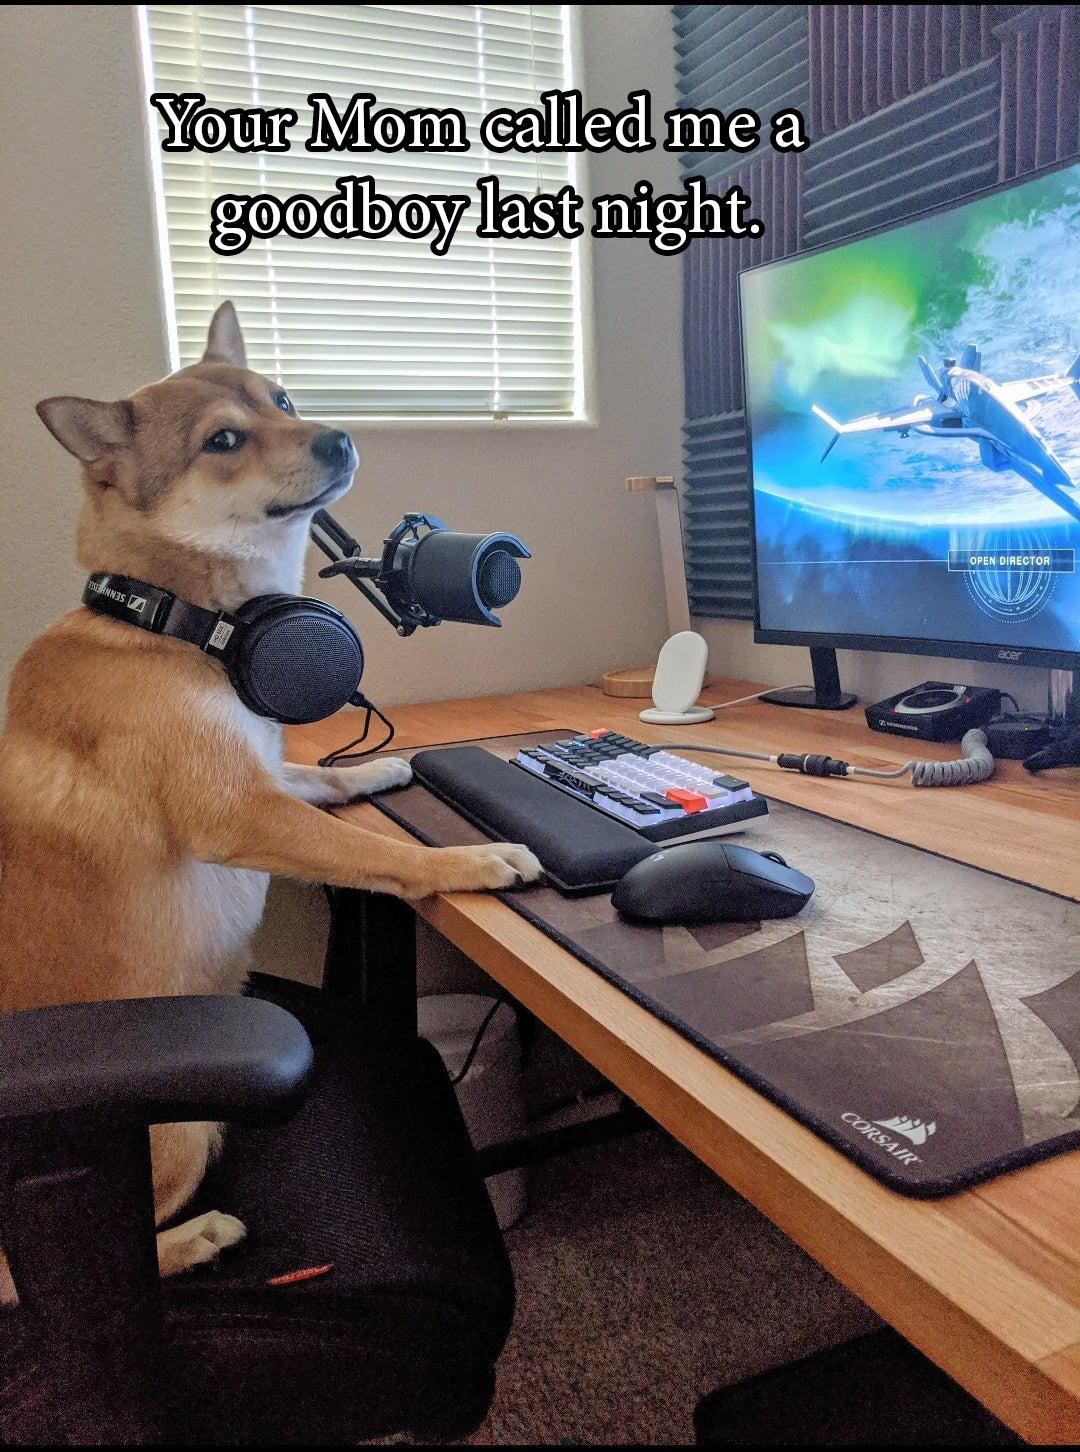 dog on a computer - Your Mom called me a goodboy last night.